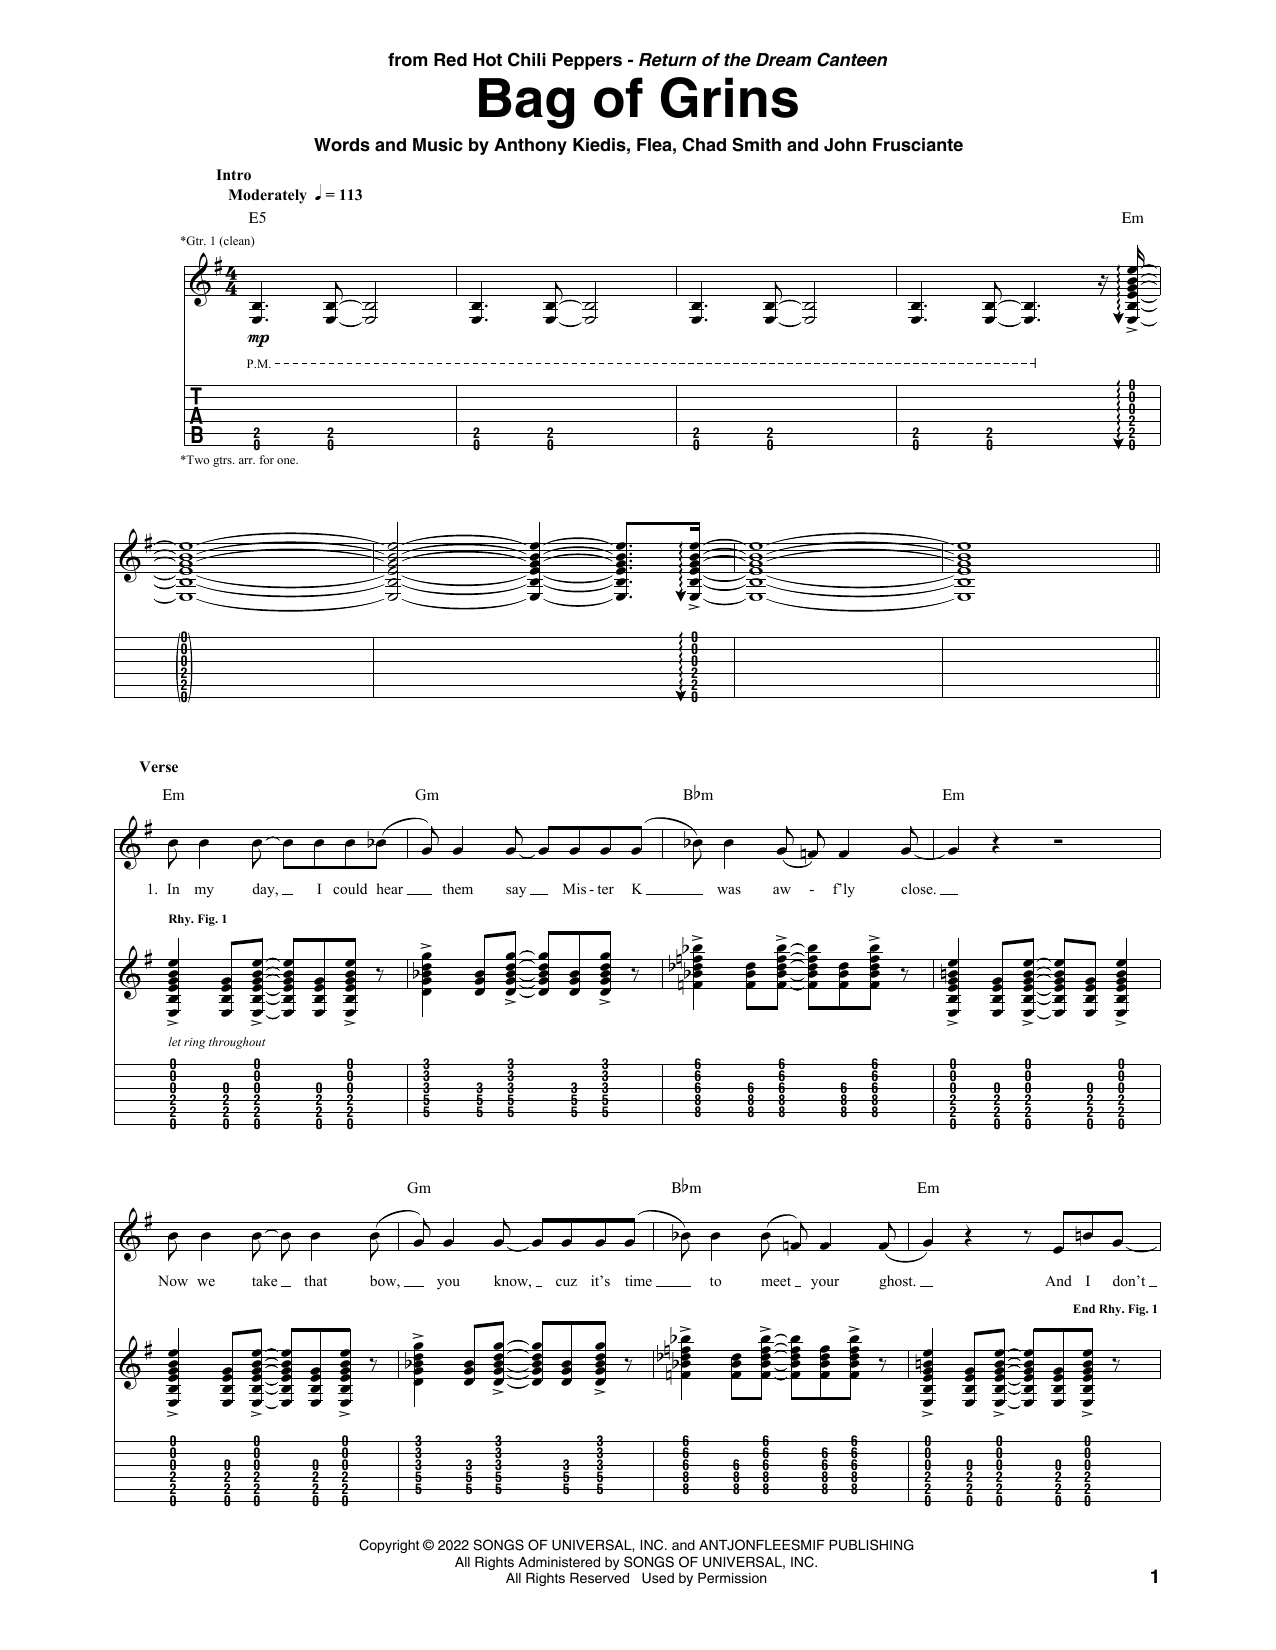 Download Red Hot Chili Peppers Bag Of Grins Sheet Music